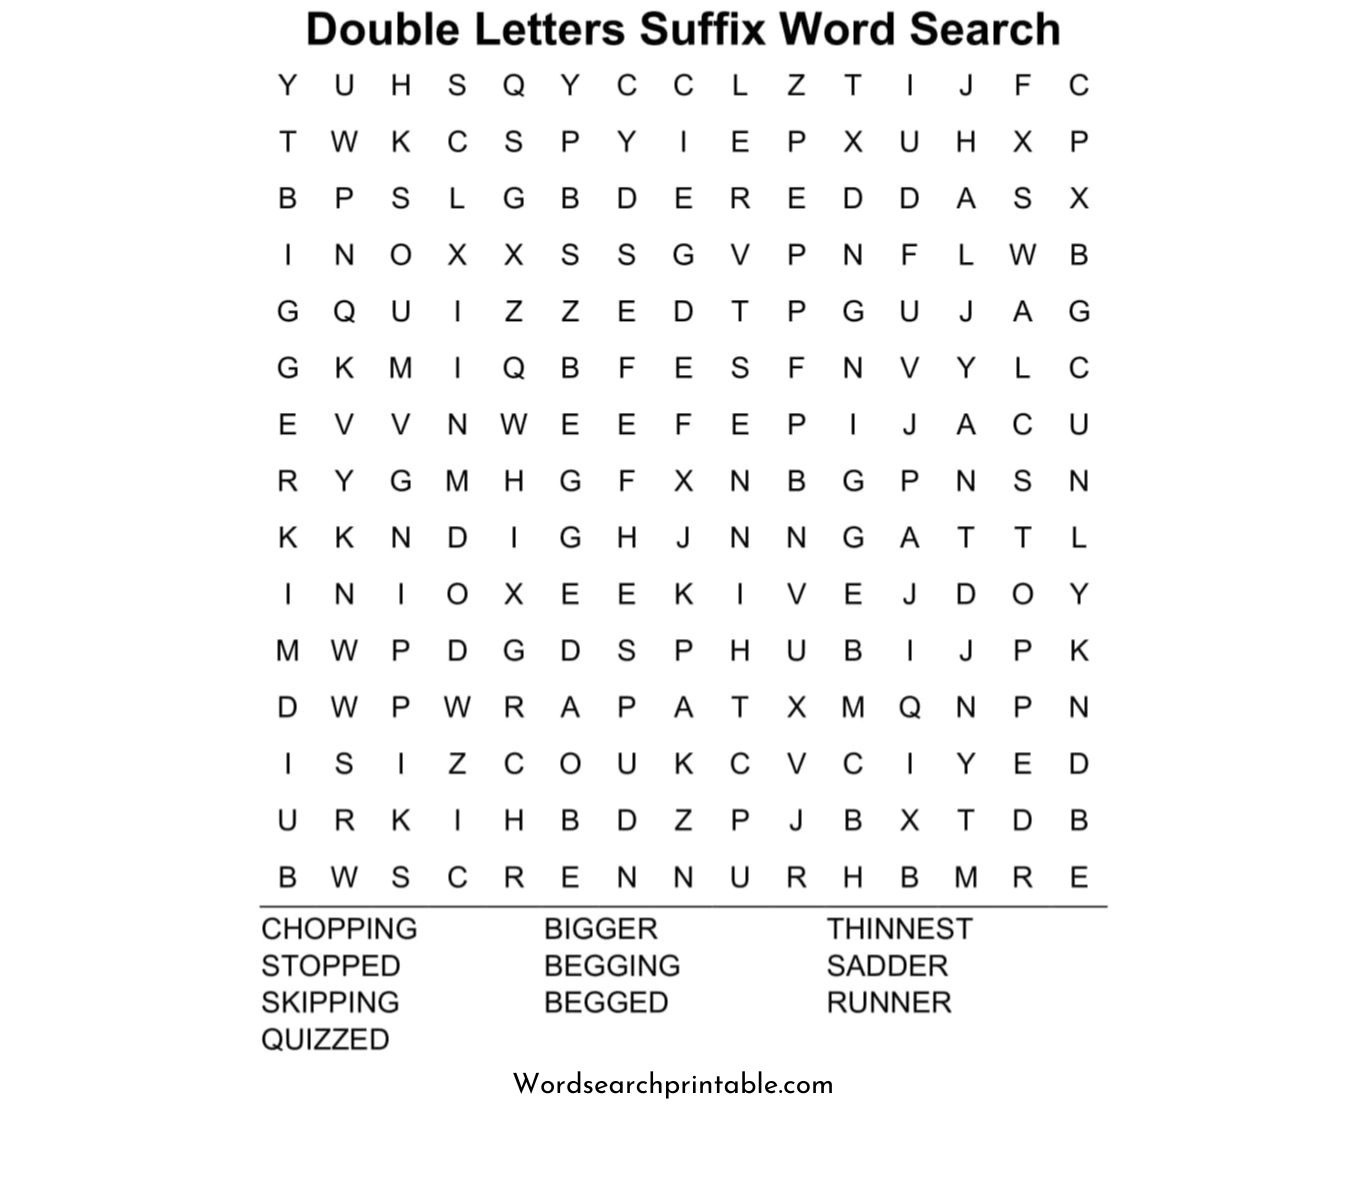 double letters suffix word search puzzle